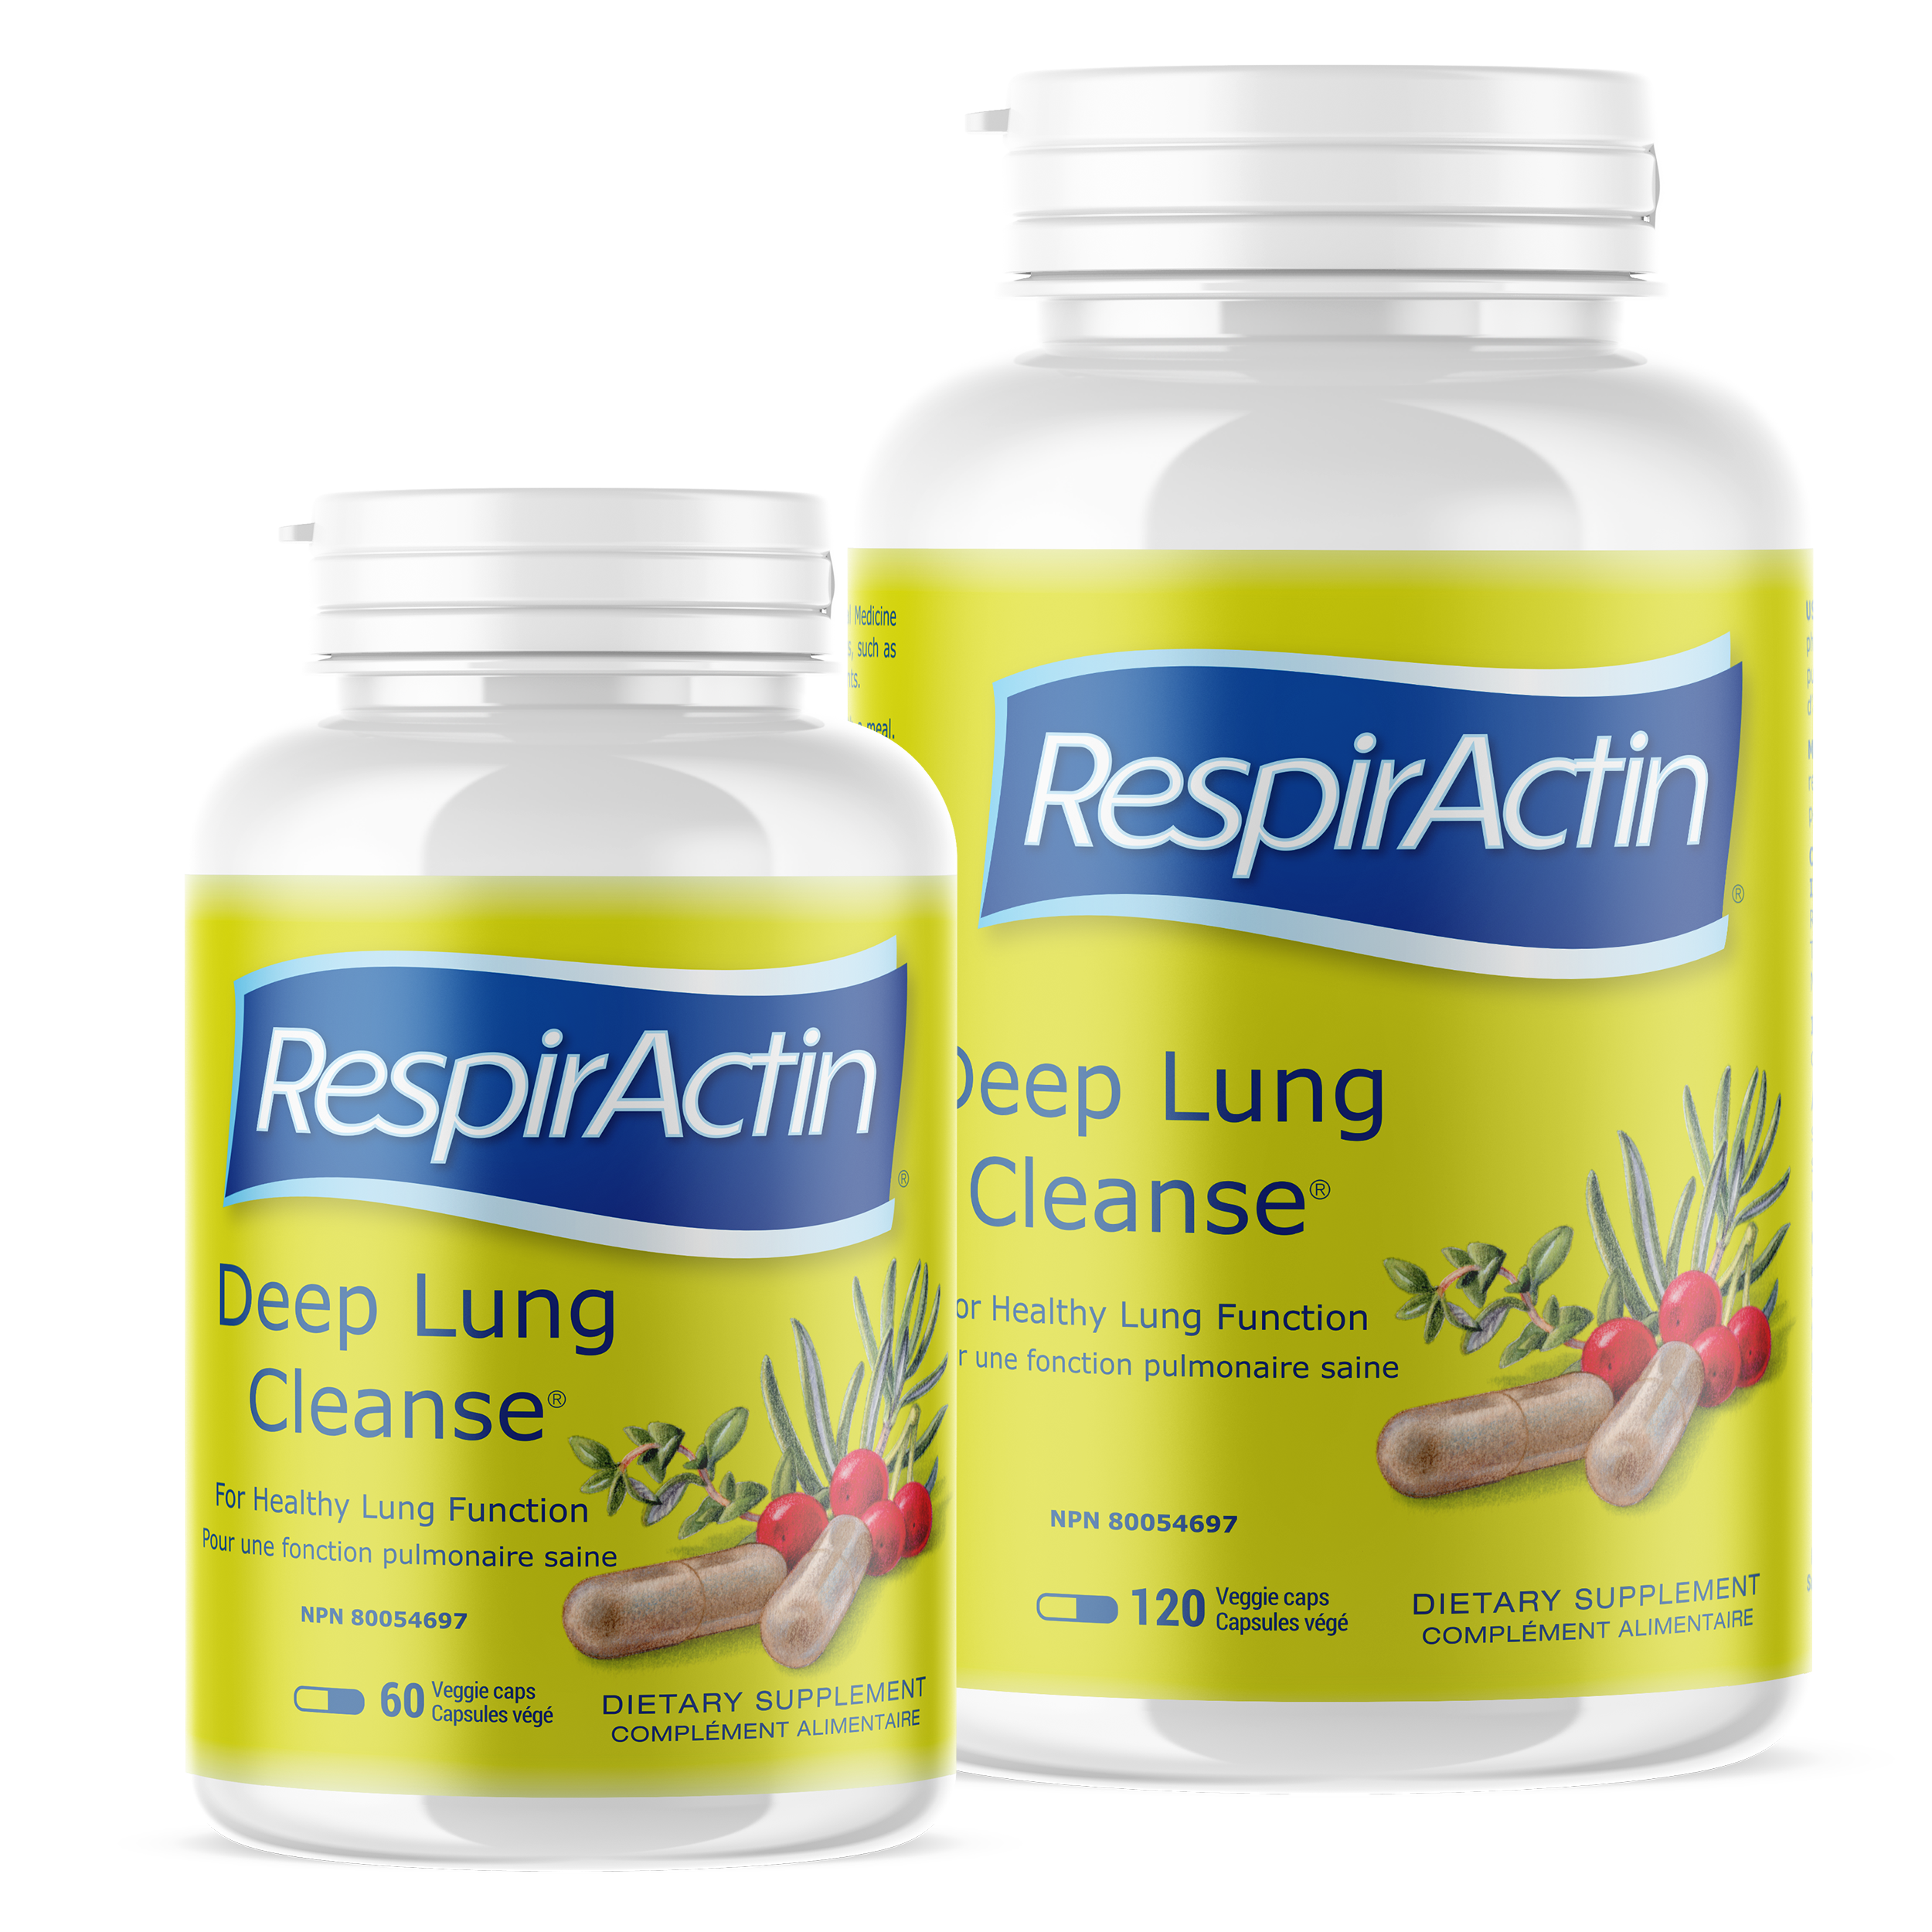  Daily Lung Cleanser & Detox Support Supplement